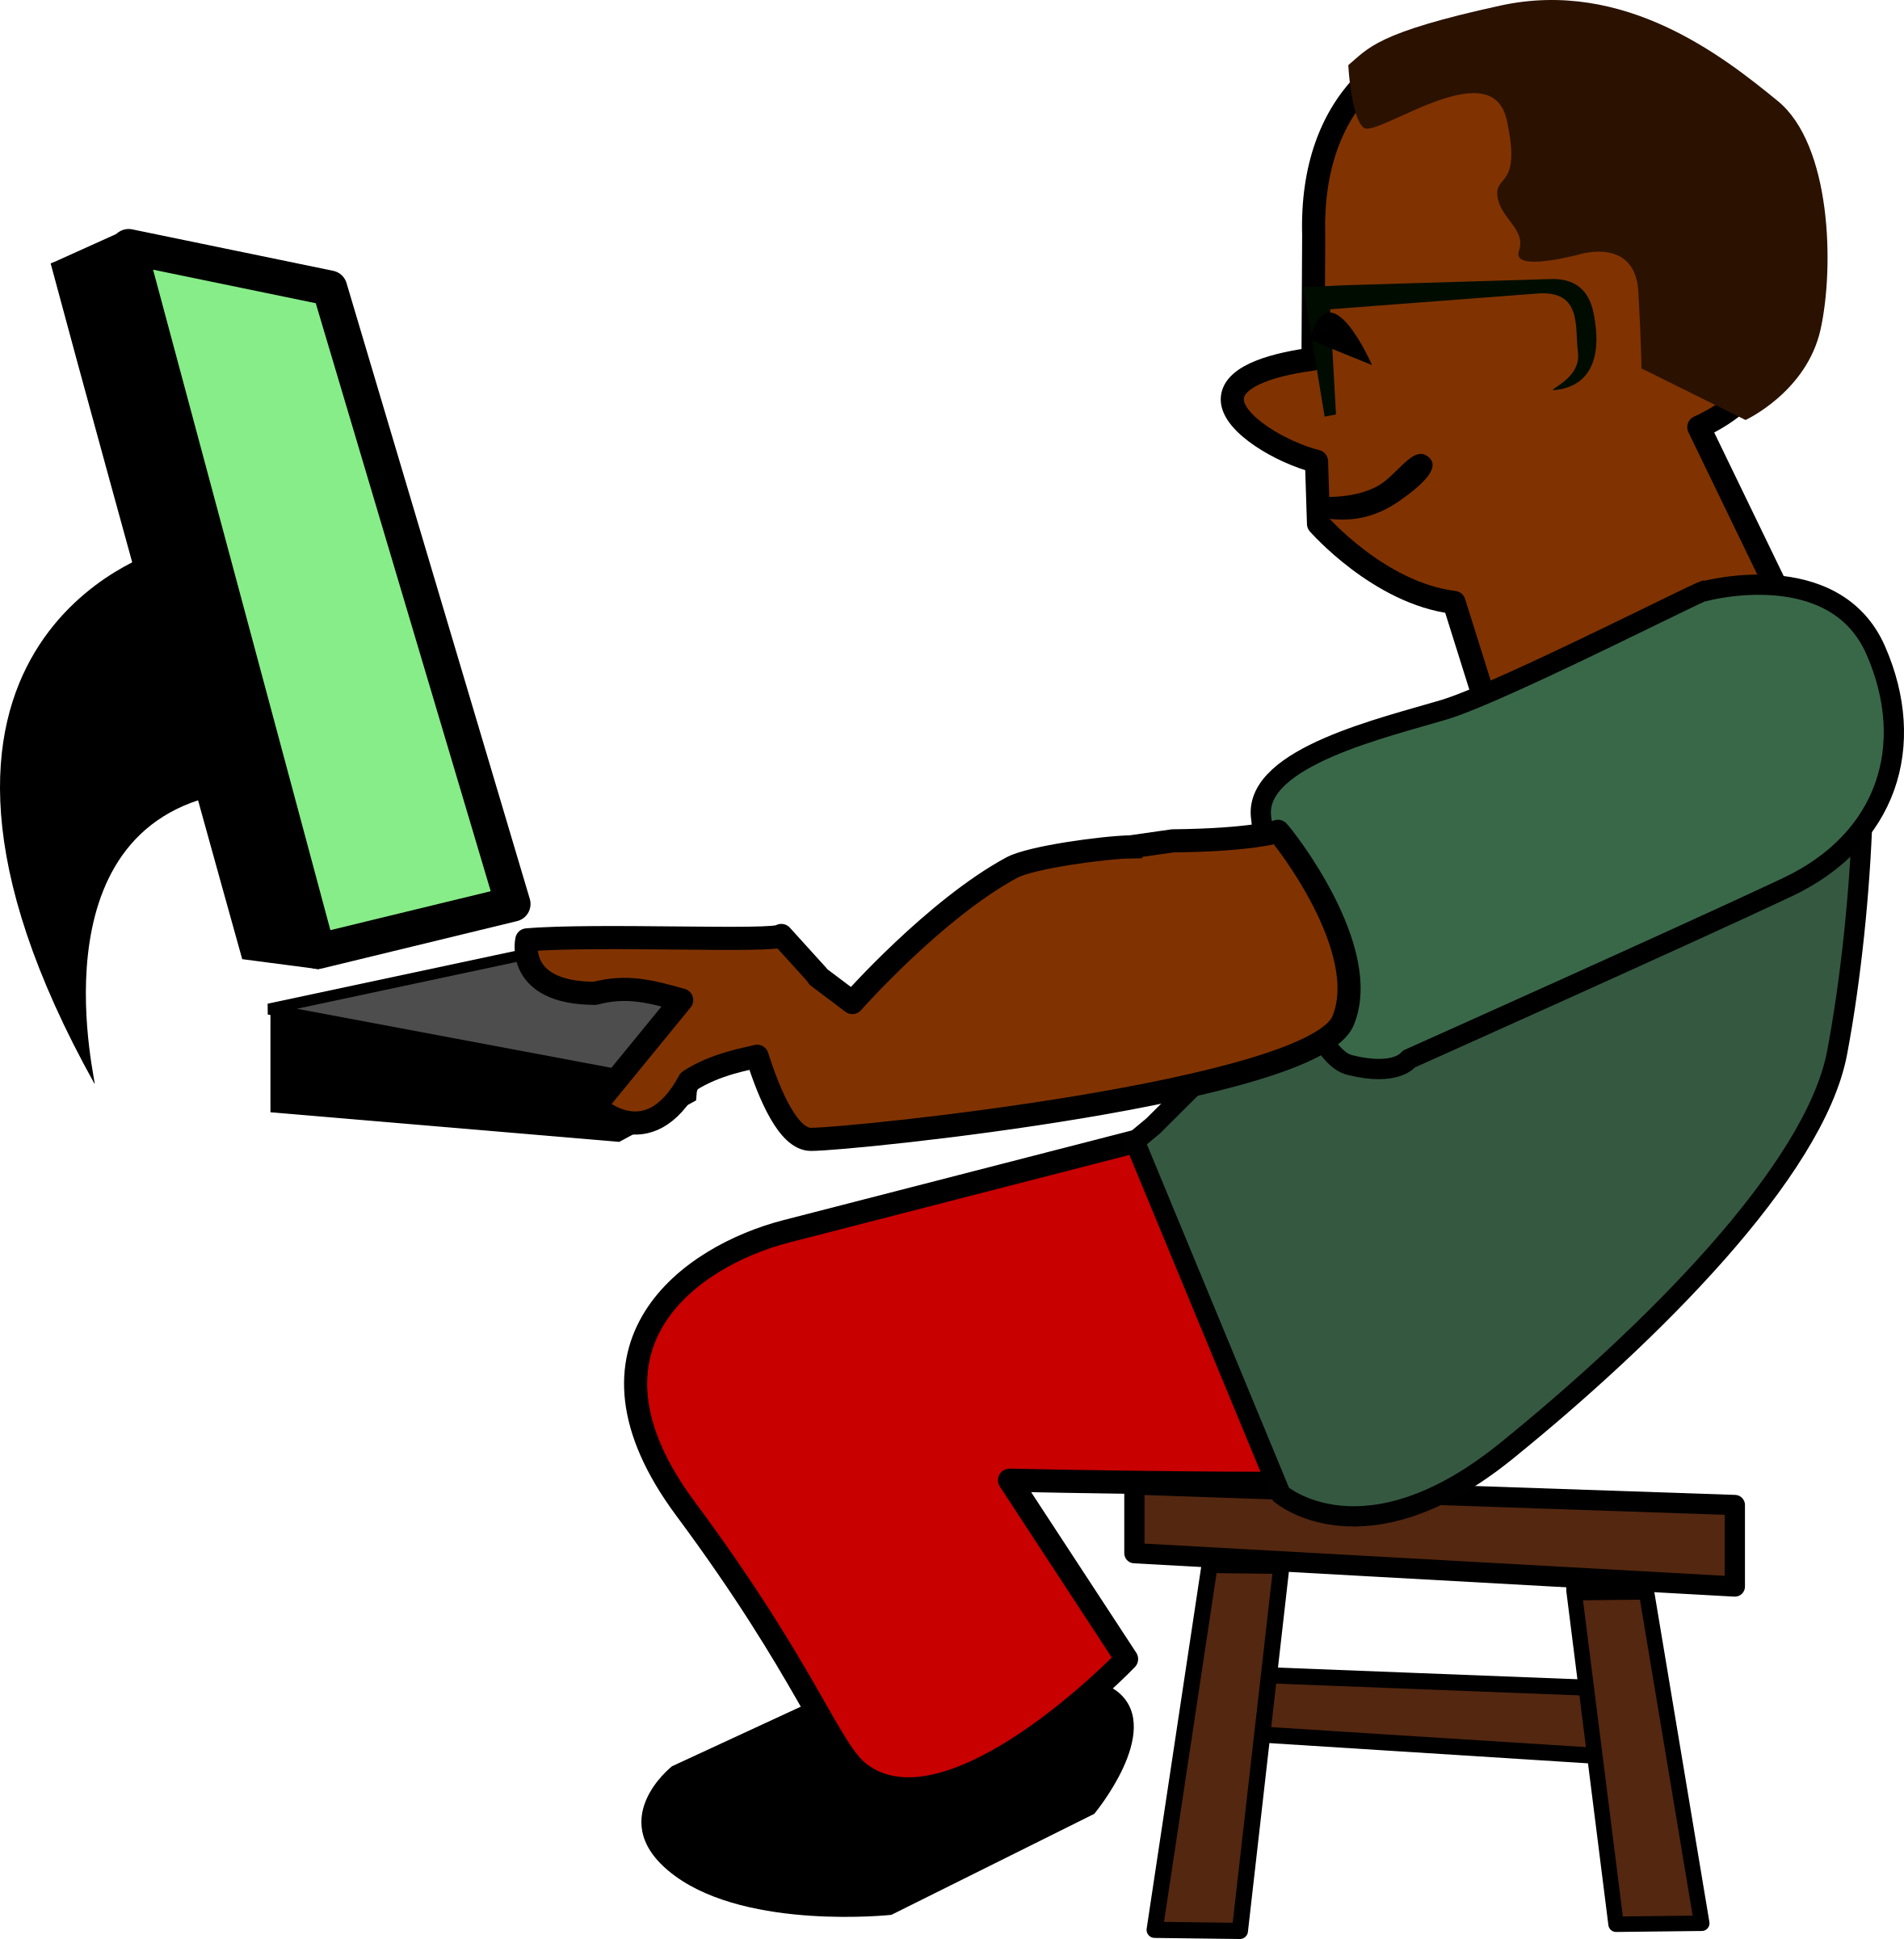 African Programmer with slowe - Coder Clipart